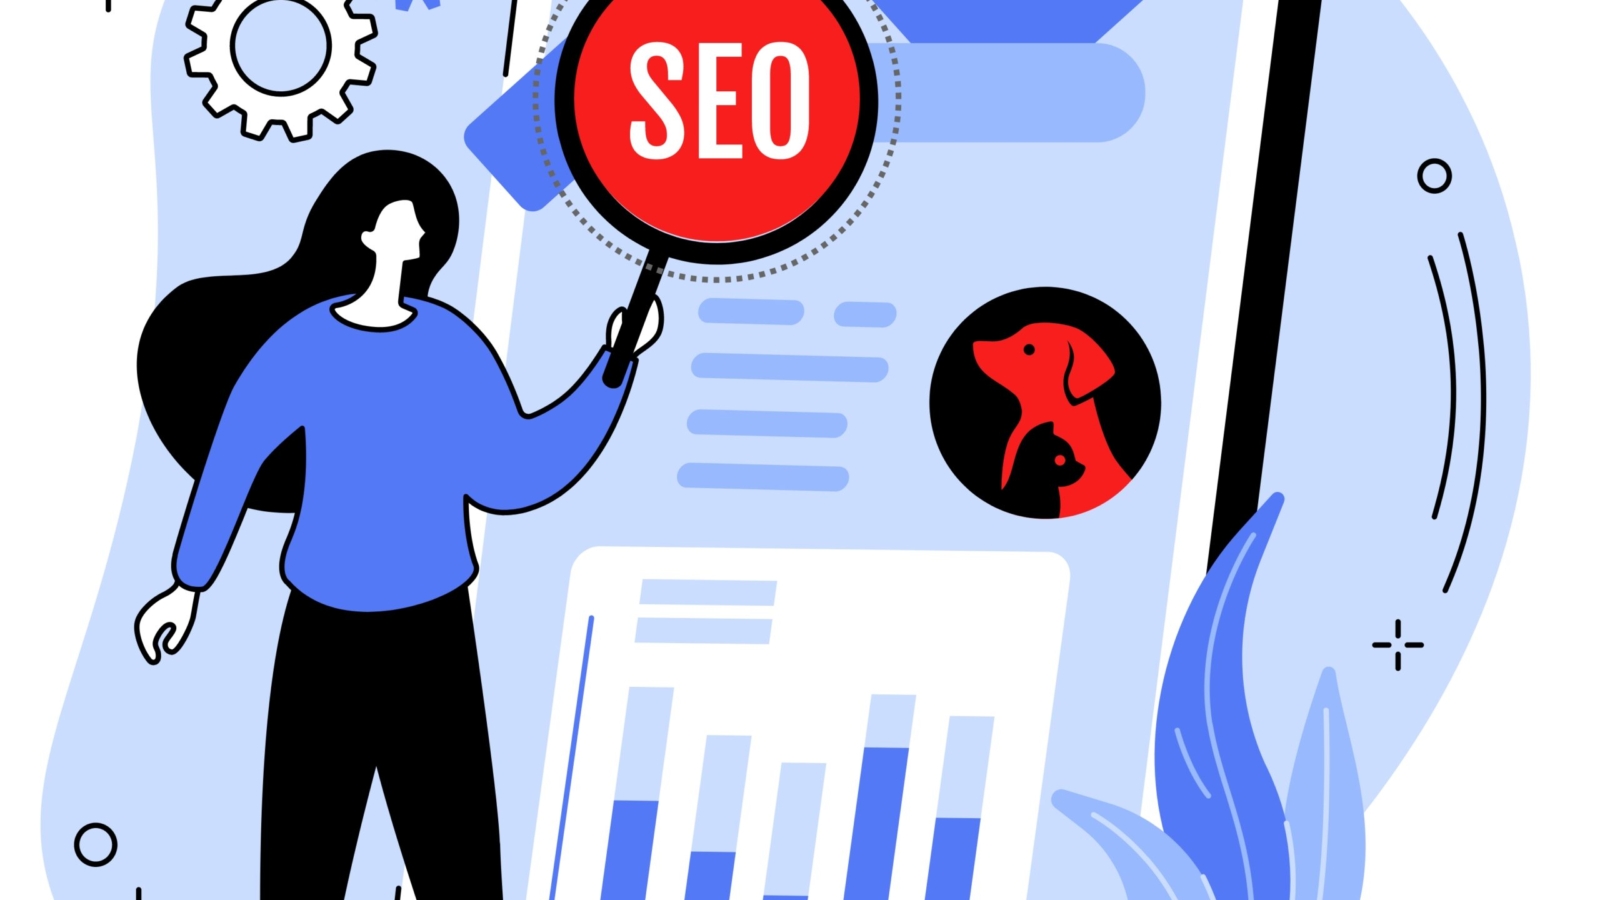 How to Appear Higher on Search Results: SEO Tips for Pet-Care Businesses